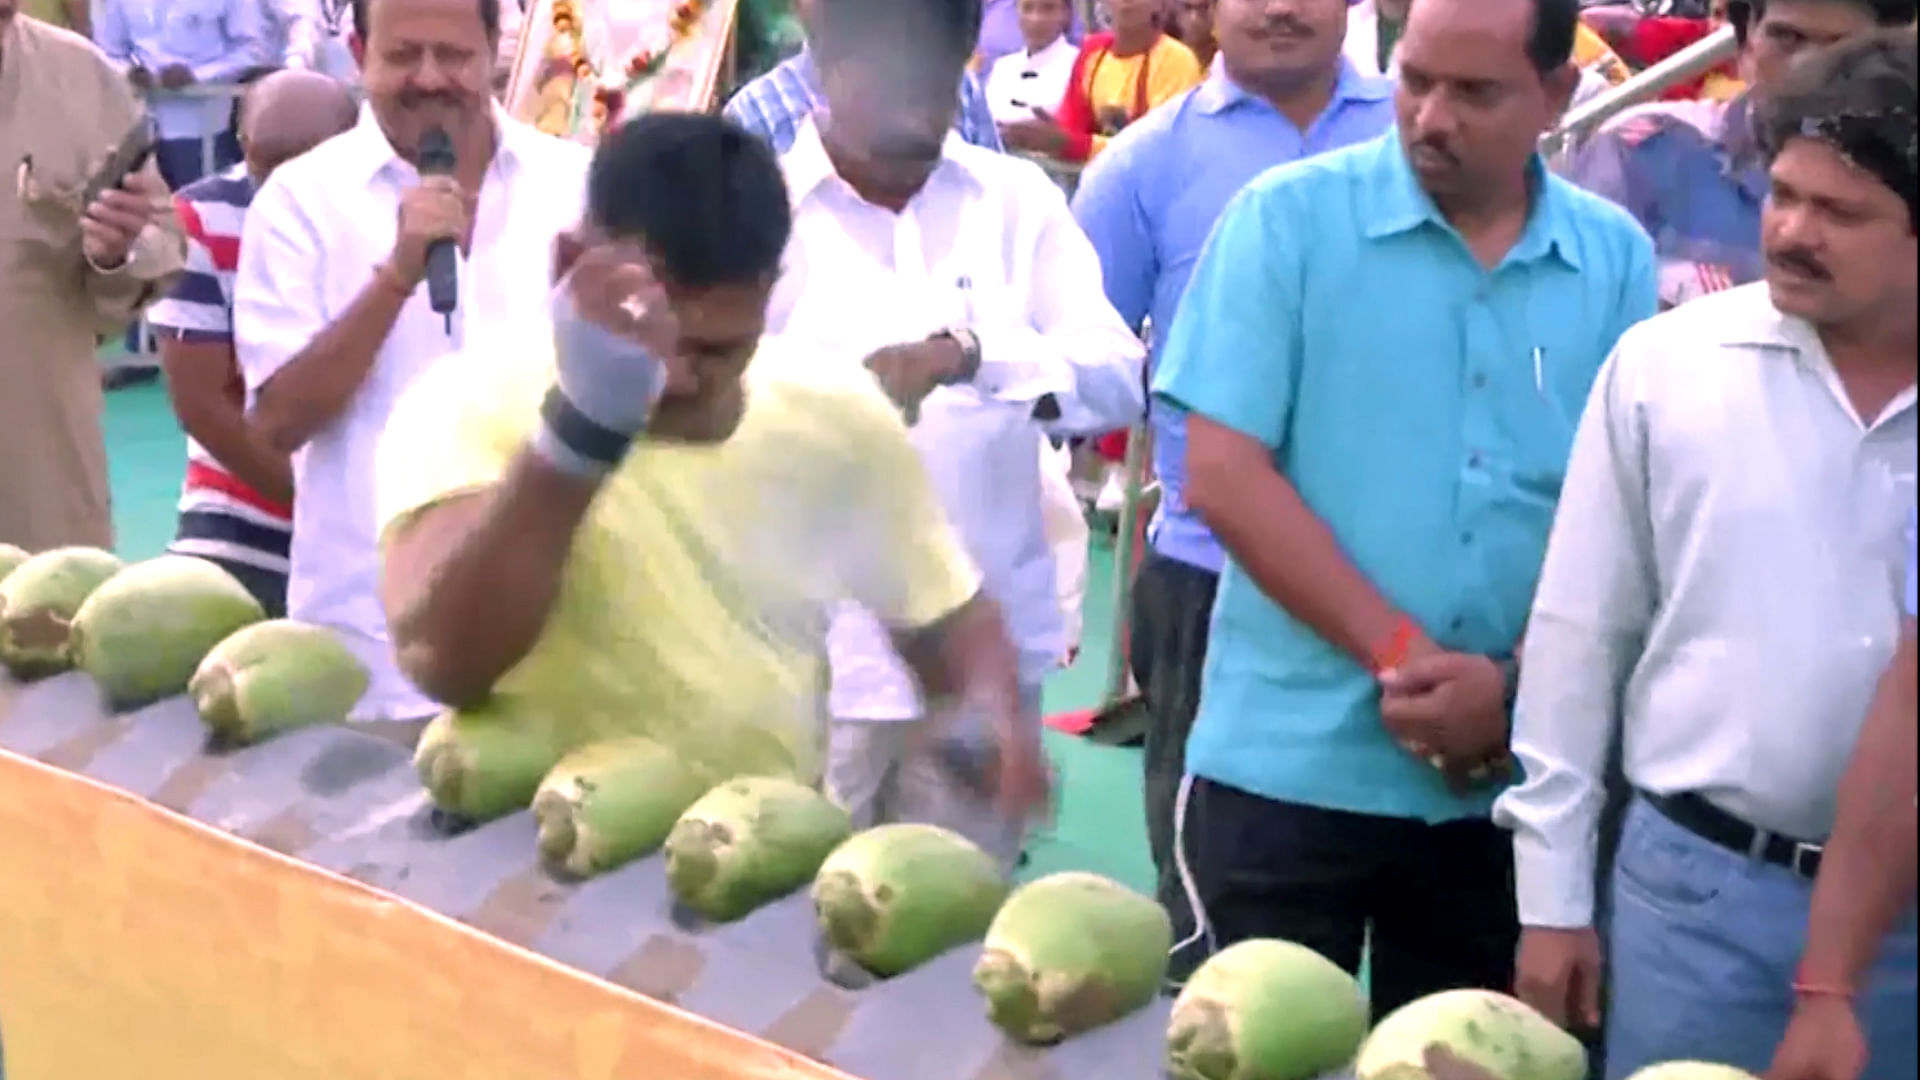 Keshab Swain smashed 92 green coconuts using nothing but his bare elbow, in less than a minute. (Photo: AP screengrab)